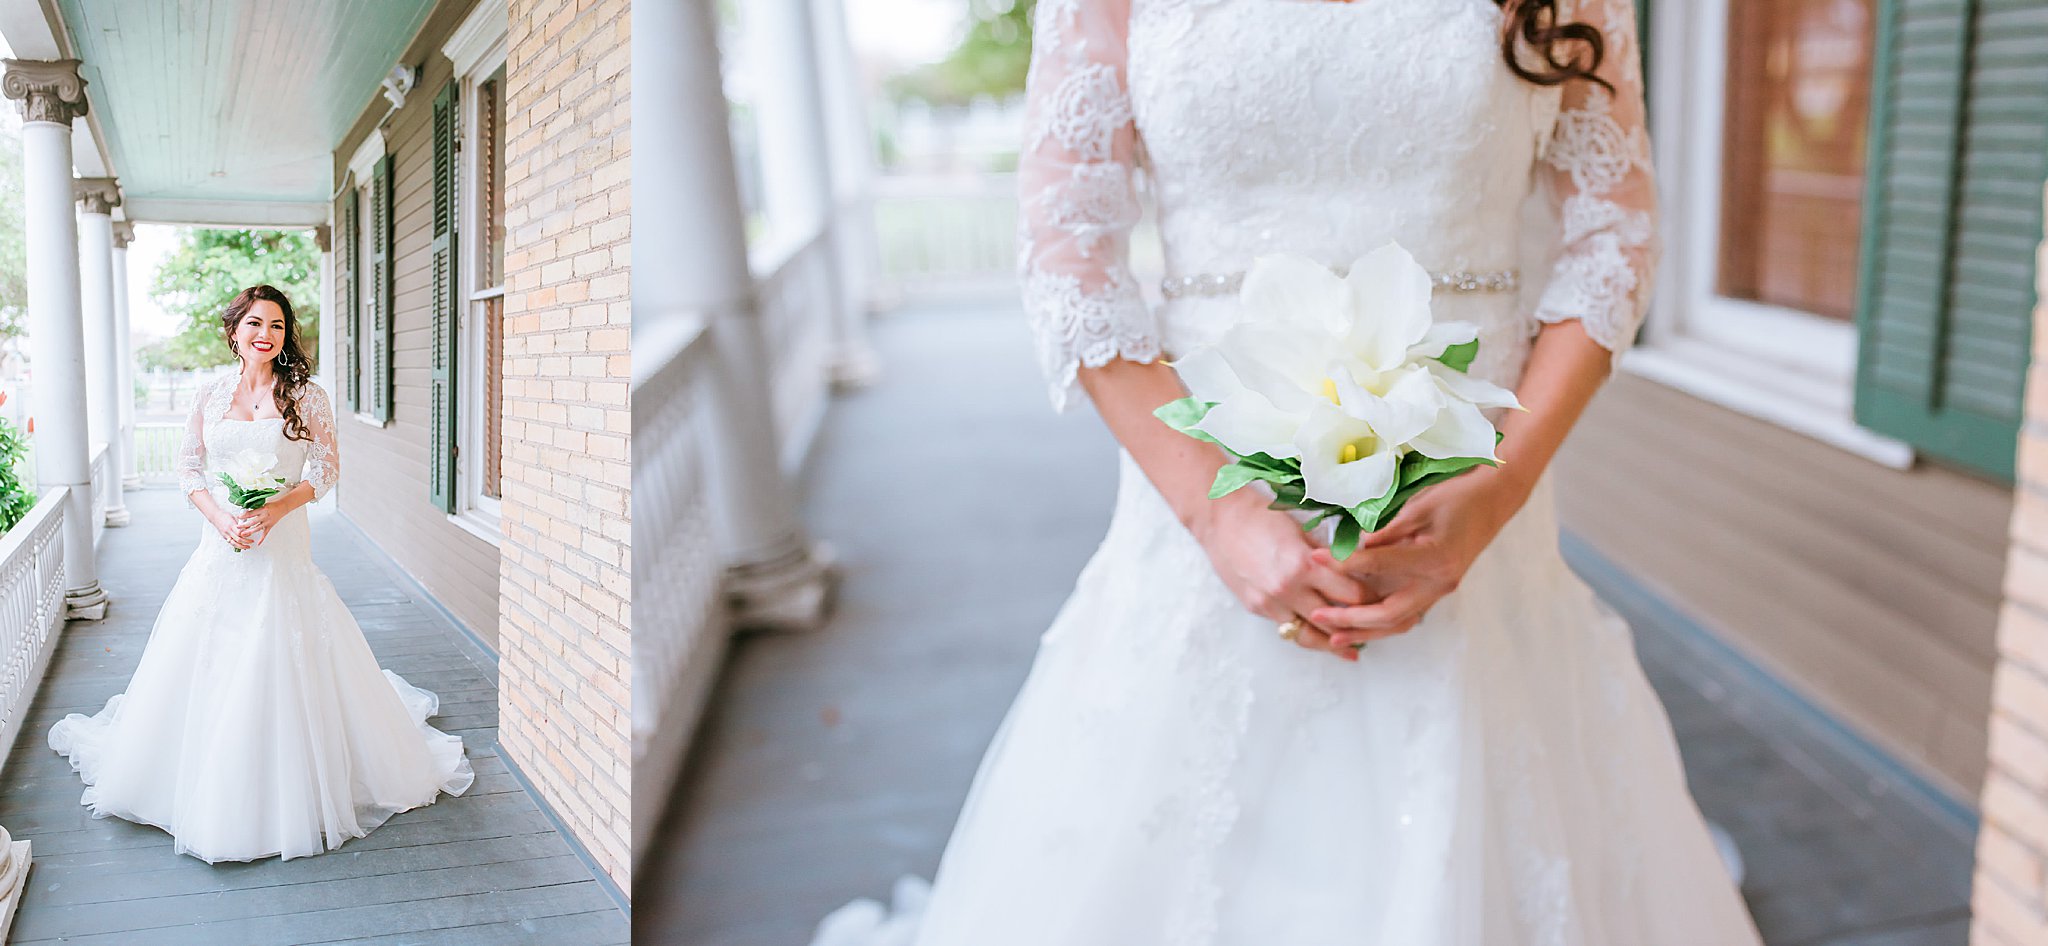 Collage of Bride in wedding dress holding a white bouquet on the patio of the Heritage Park house in Corpus Christi, Texas